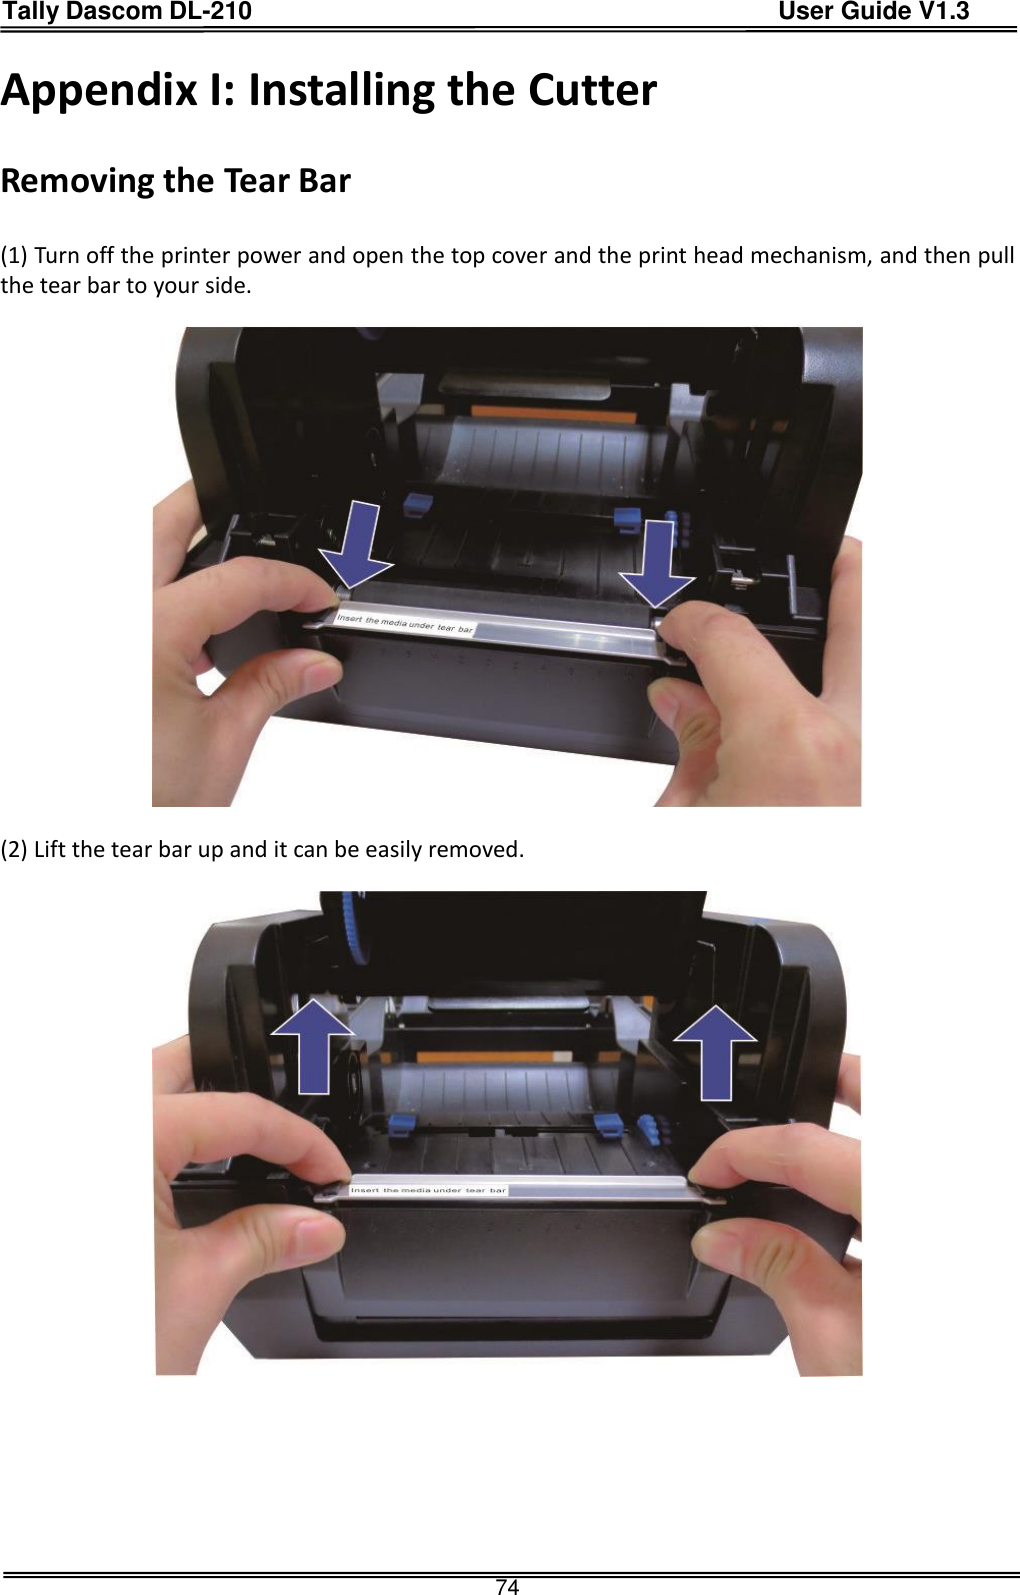 Tally Dascom DL-210                                          User Guide V1.3  74 Appendix I: Installing the Cutter  Removing the Tear Bar  (1) Turn off the printer power and open the top cover and the print head mechanism, and then pull the tear bar to your side.    (2) Lift the tear bar up and it can be easily removed.       